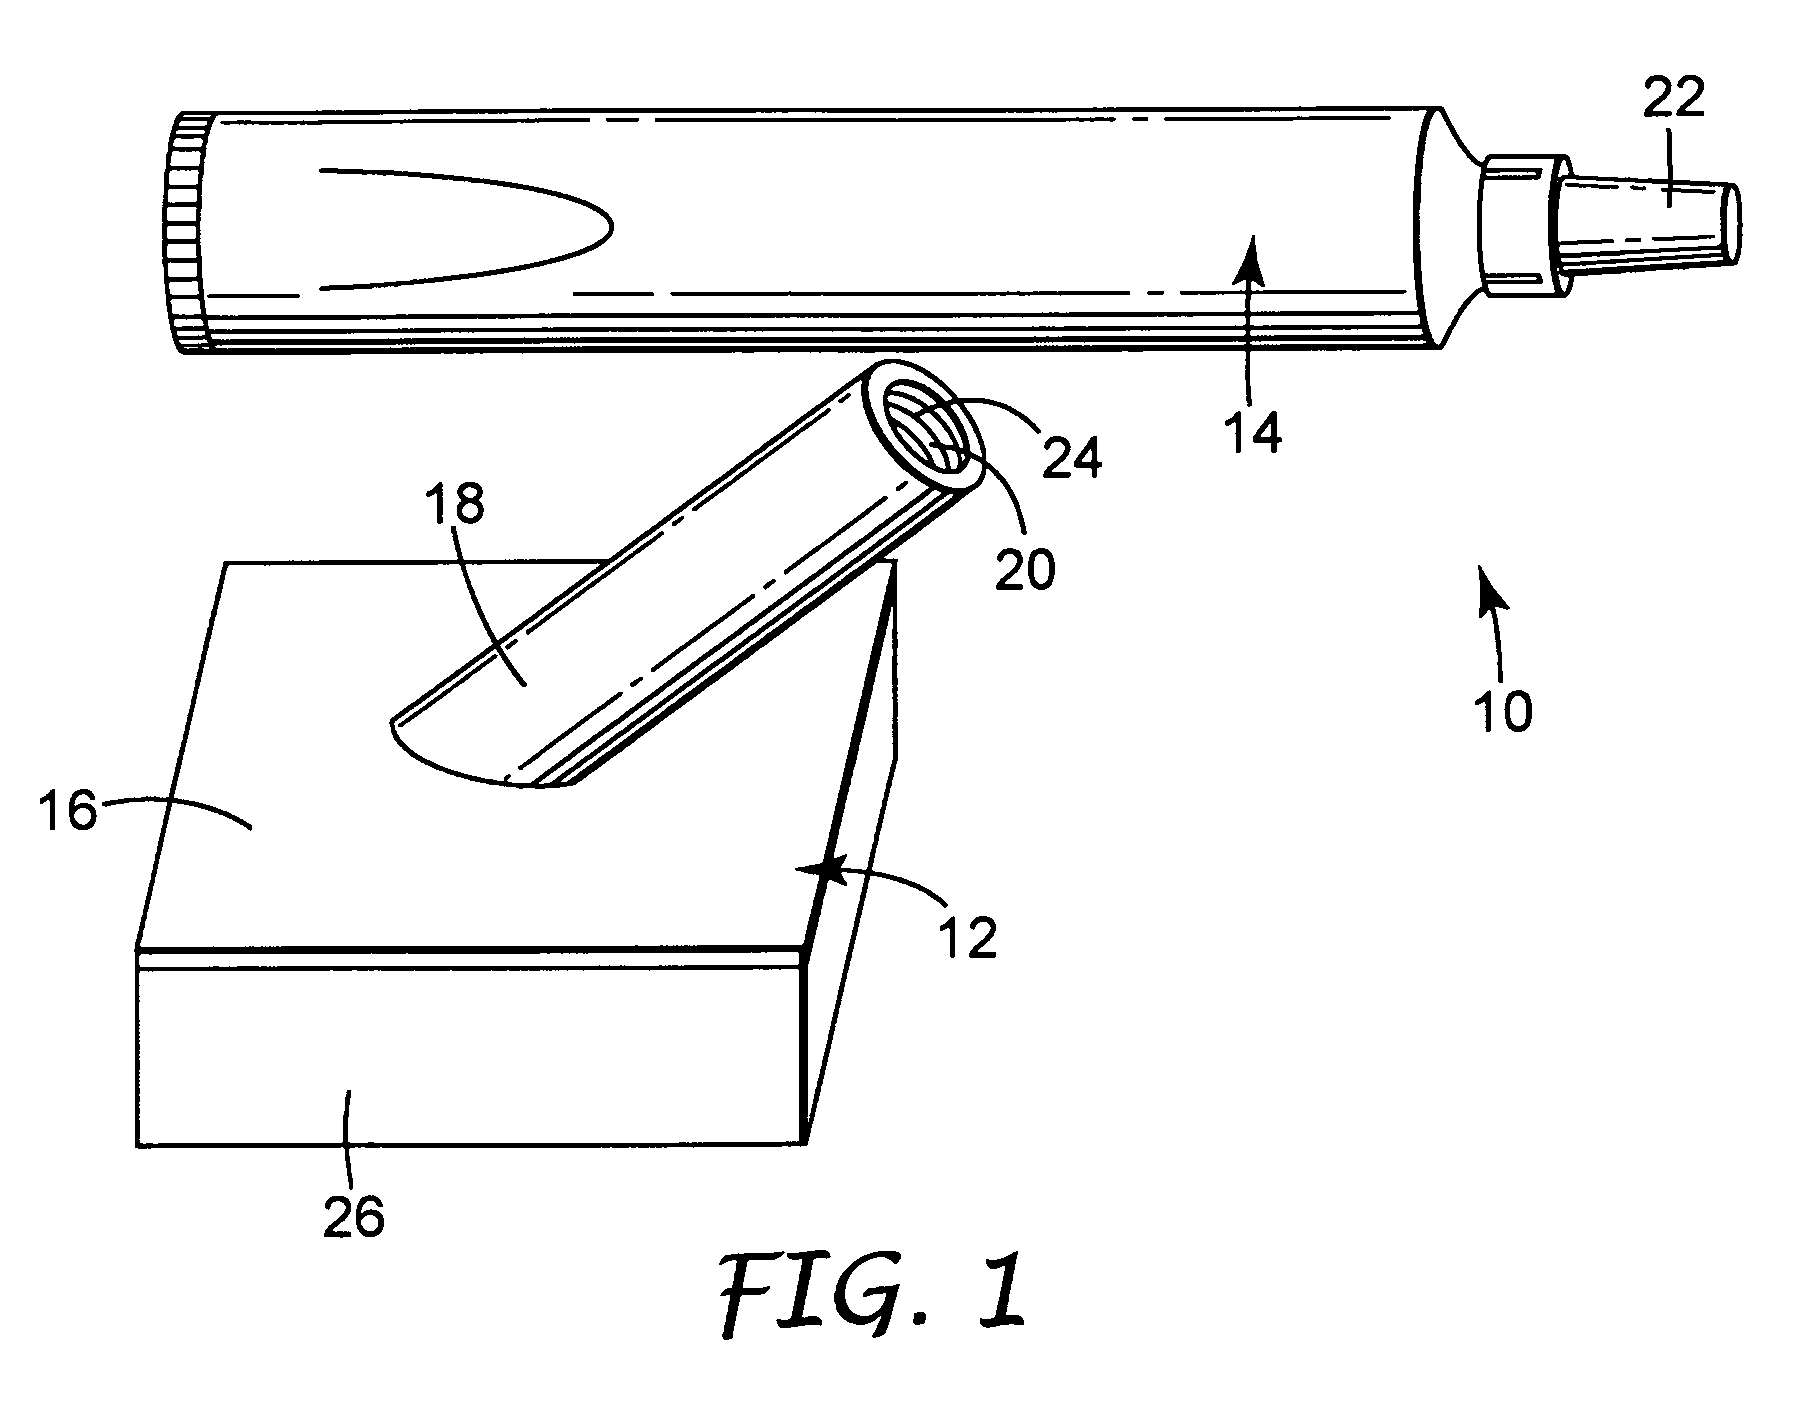 Surgical prep solution applicator system and methods